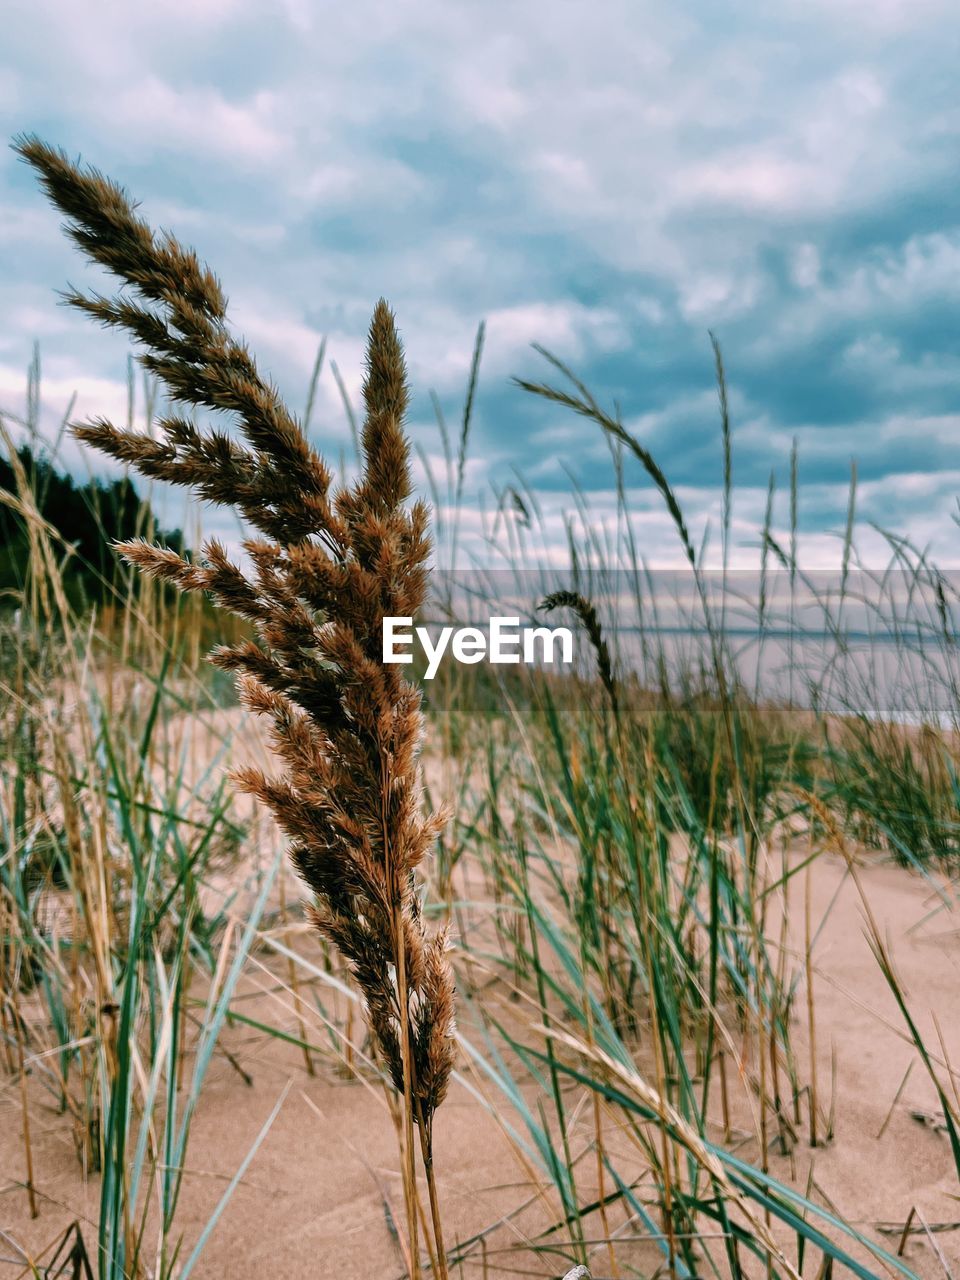 grass, plant, nature, land, sky, cloud, landscape, no people, growth, sea, beach, field, beauty in nature, water, environment, tranquility, scenics - nature, sand, natural environment, outdoors, prairie, crop, agriculture, day, tree, marram grass, tranquil scene, reed, sand dune, coast, non-urban scene, rural scene